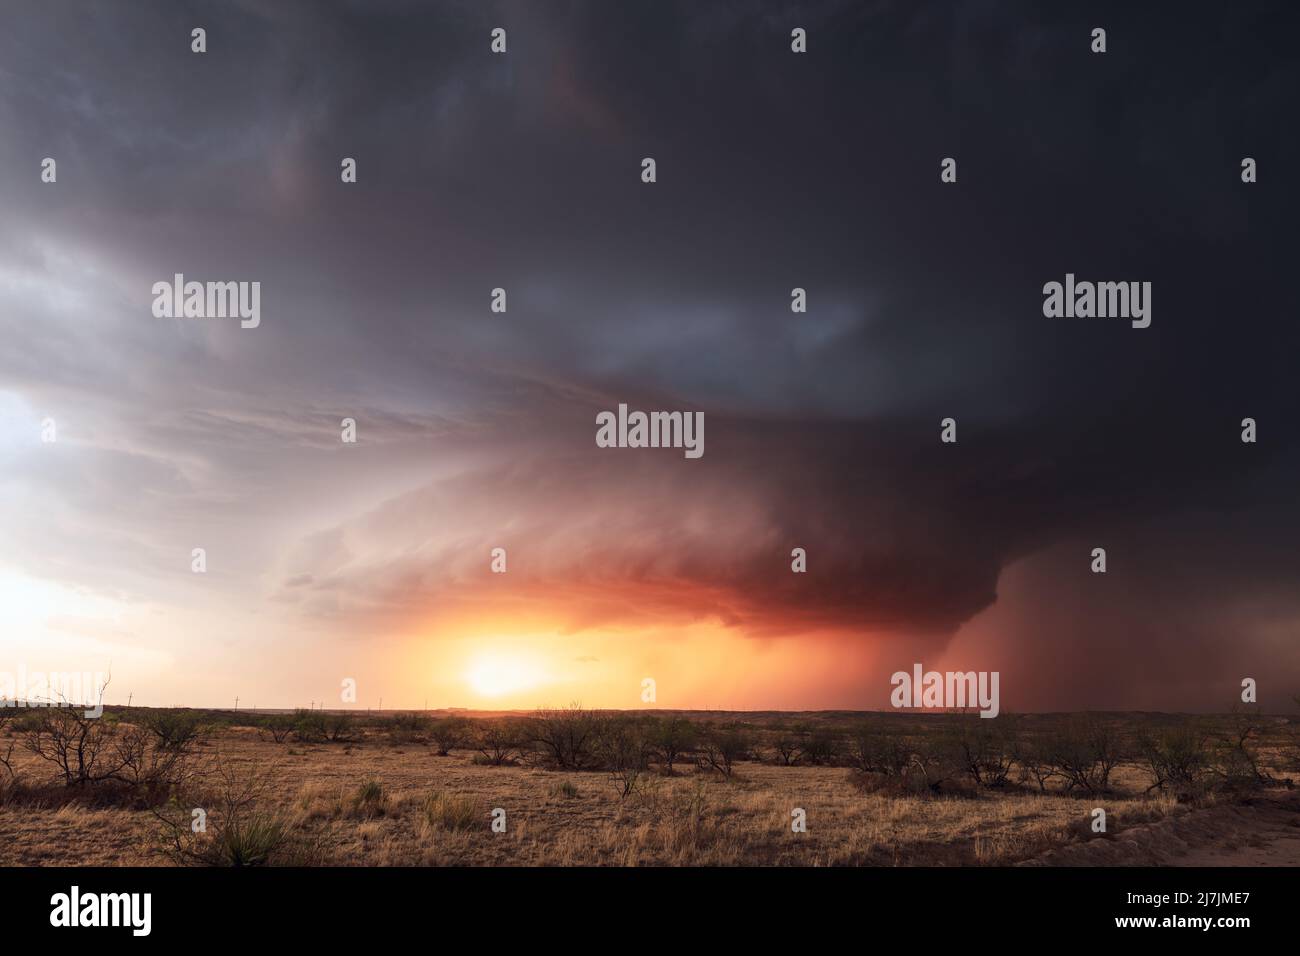 Ominous supercell storm clouds at sunset near Channing, Texas, USA Stock Photo